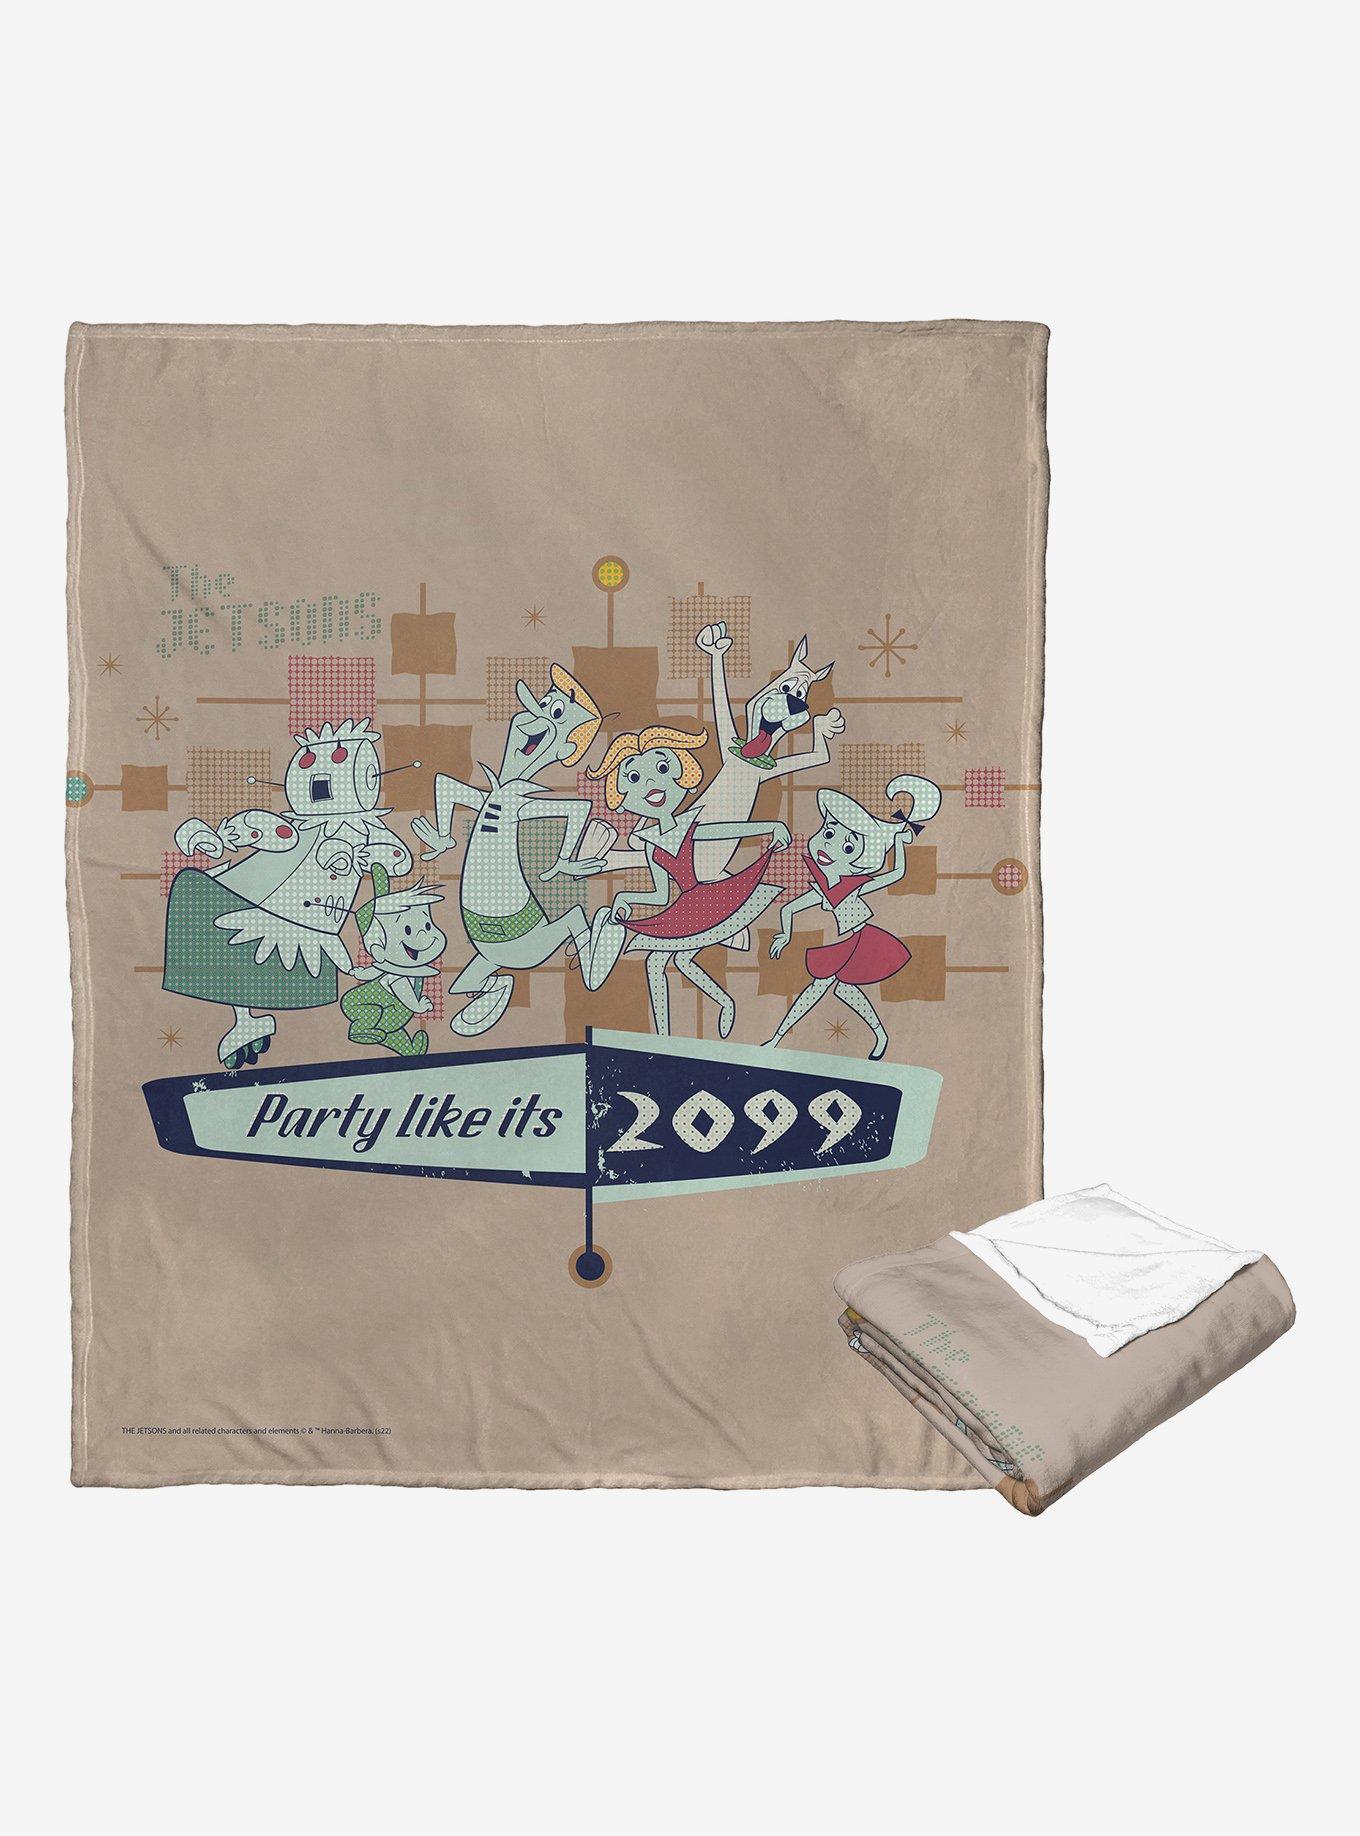 The Jetsons Party Like It's 2099 Throw Blanket